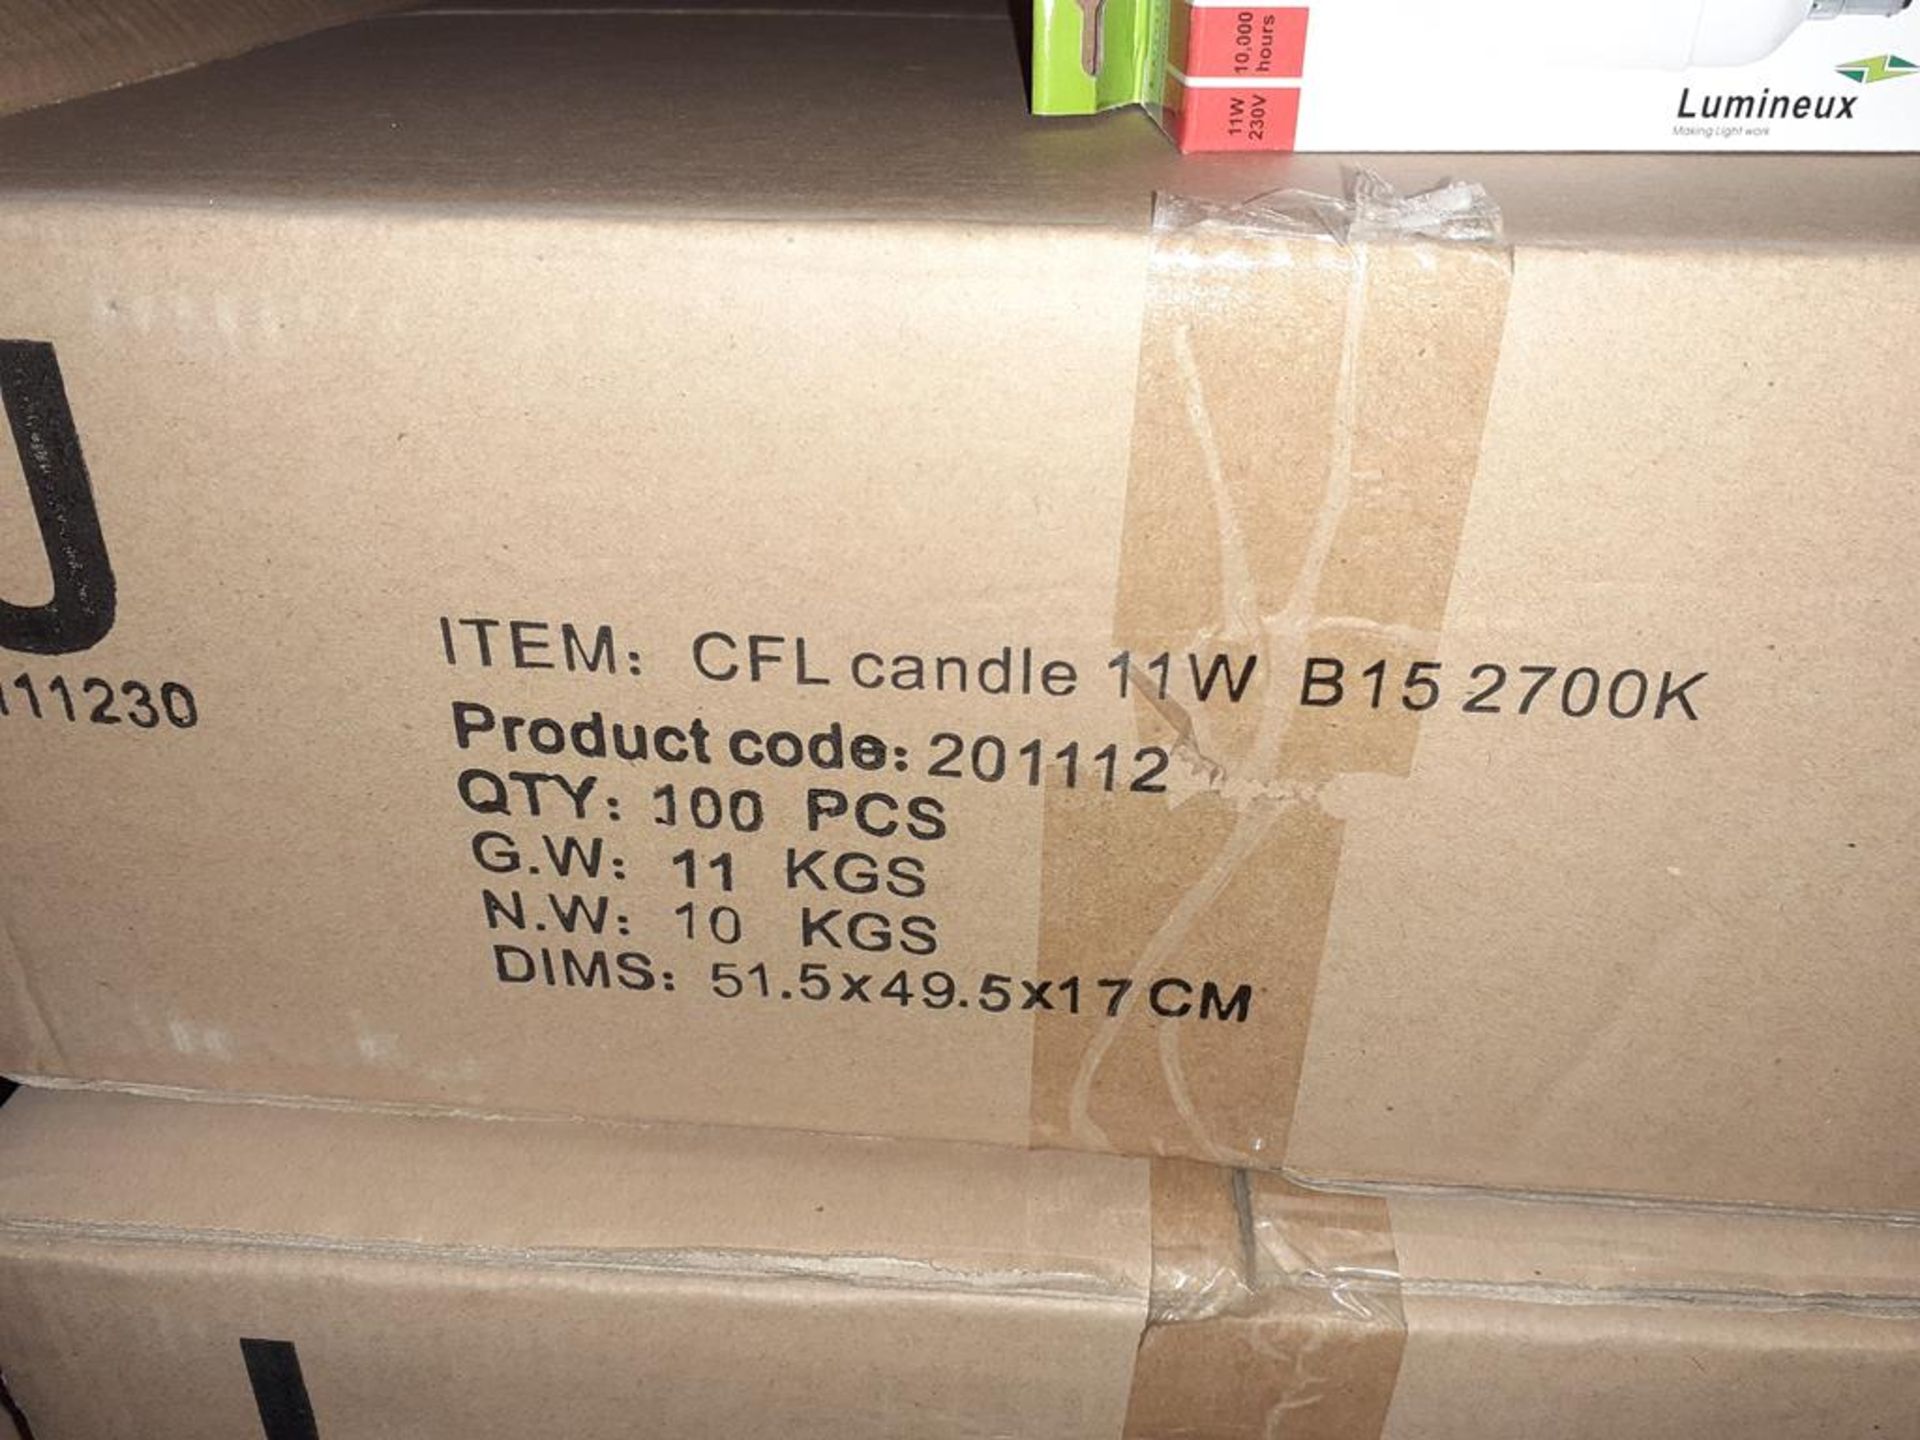 3 x boxes of Lumineux CFL candle - Image 2 of 5